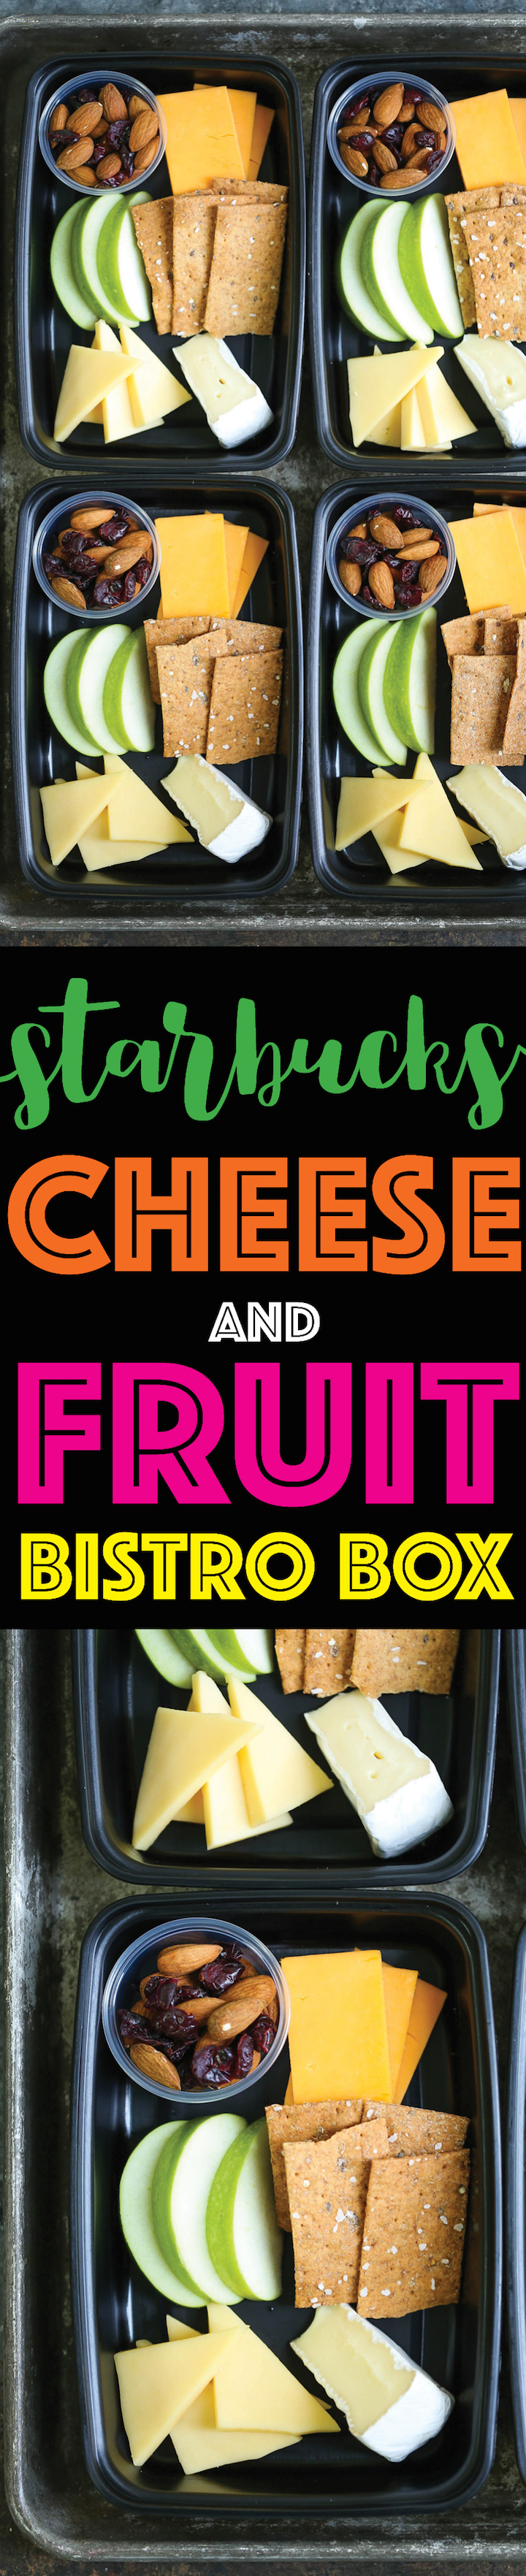 Copycat Starbucks Cheese and Fruit Bistro Box - Prep for the week ahead! Perfect to refuel and snack with cheese, crackers, apples, cranberries and almonds!